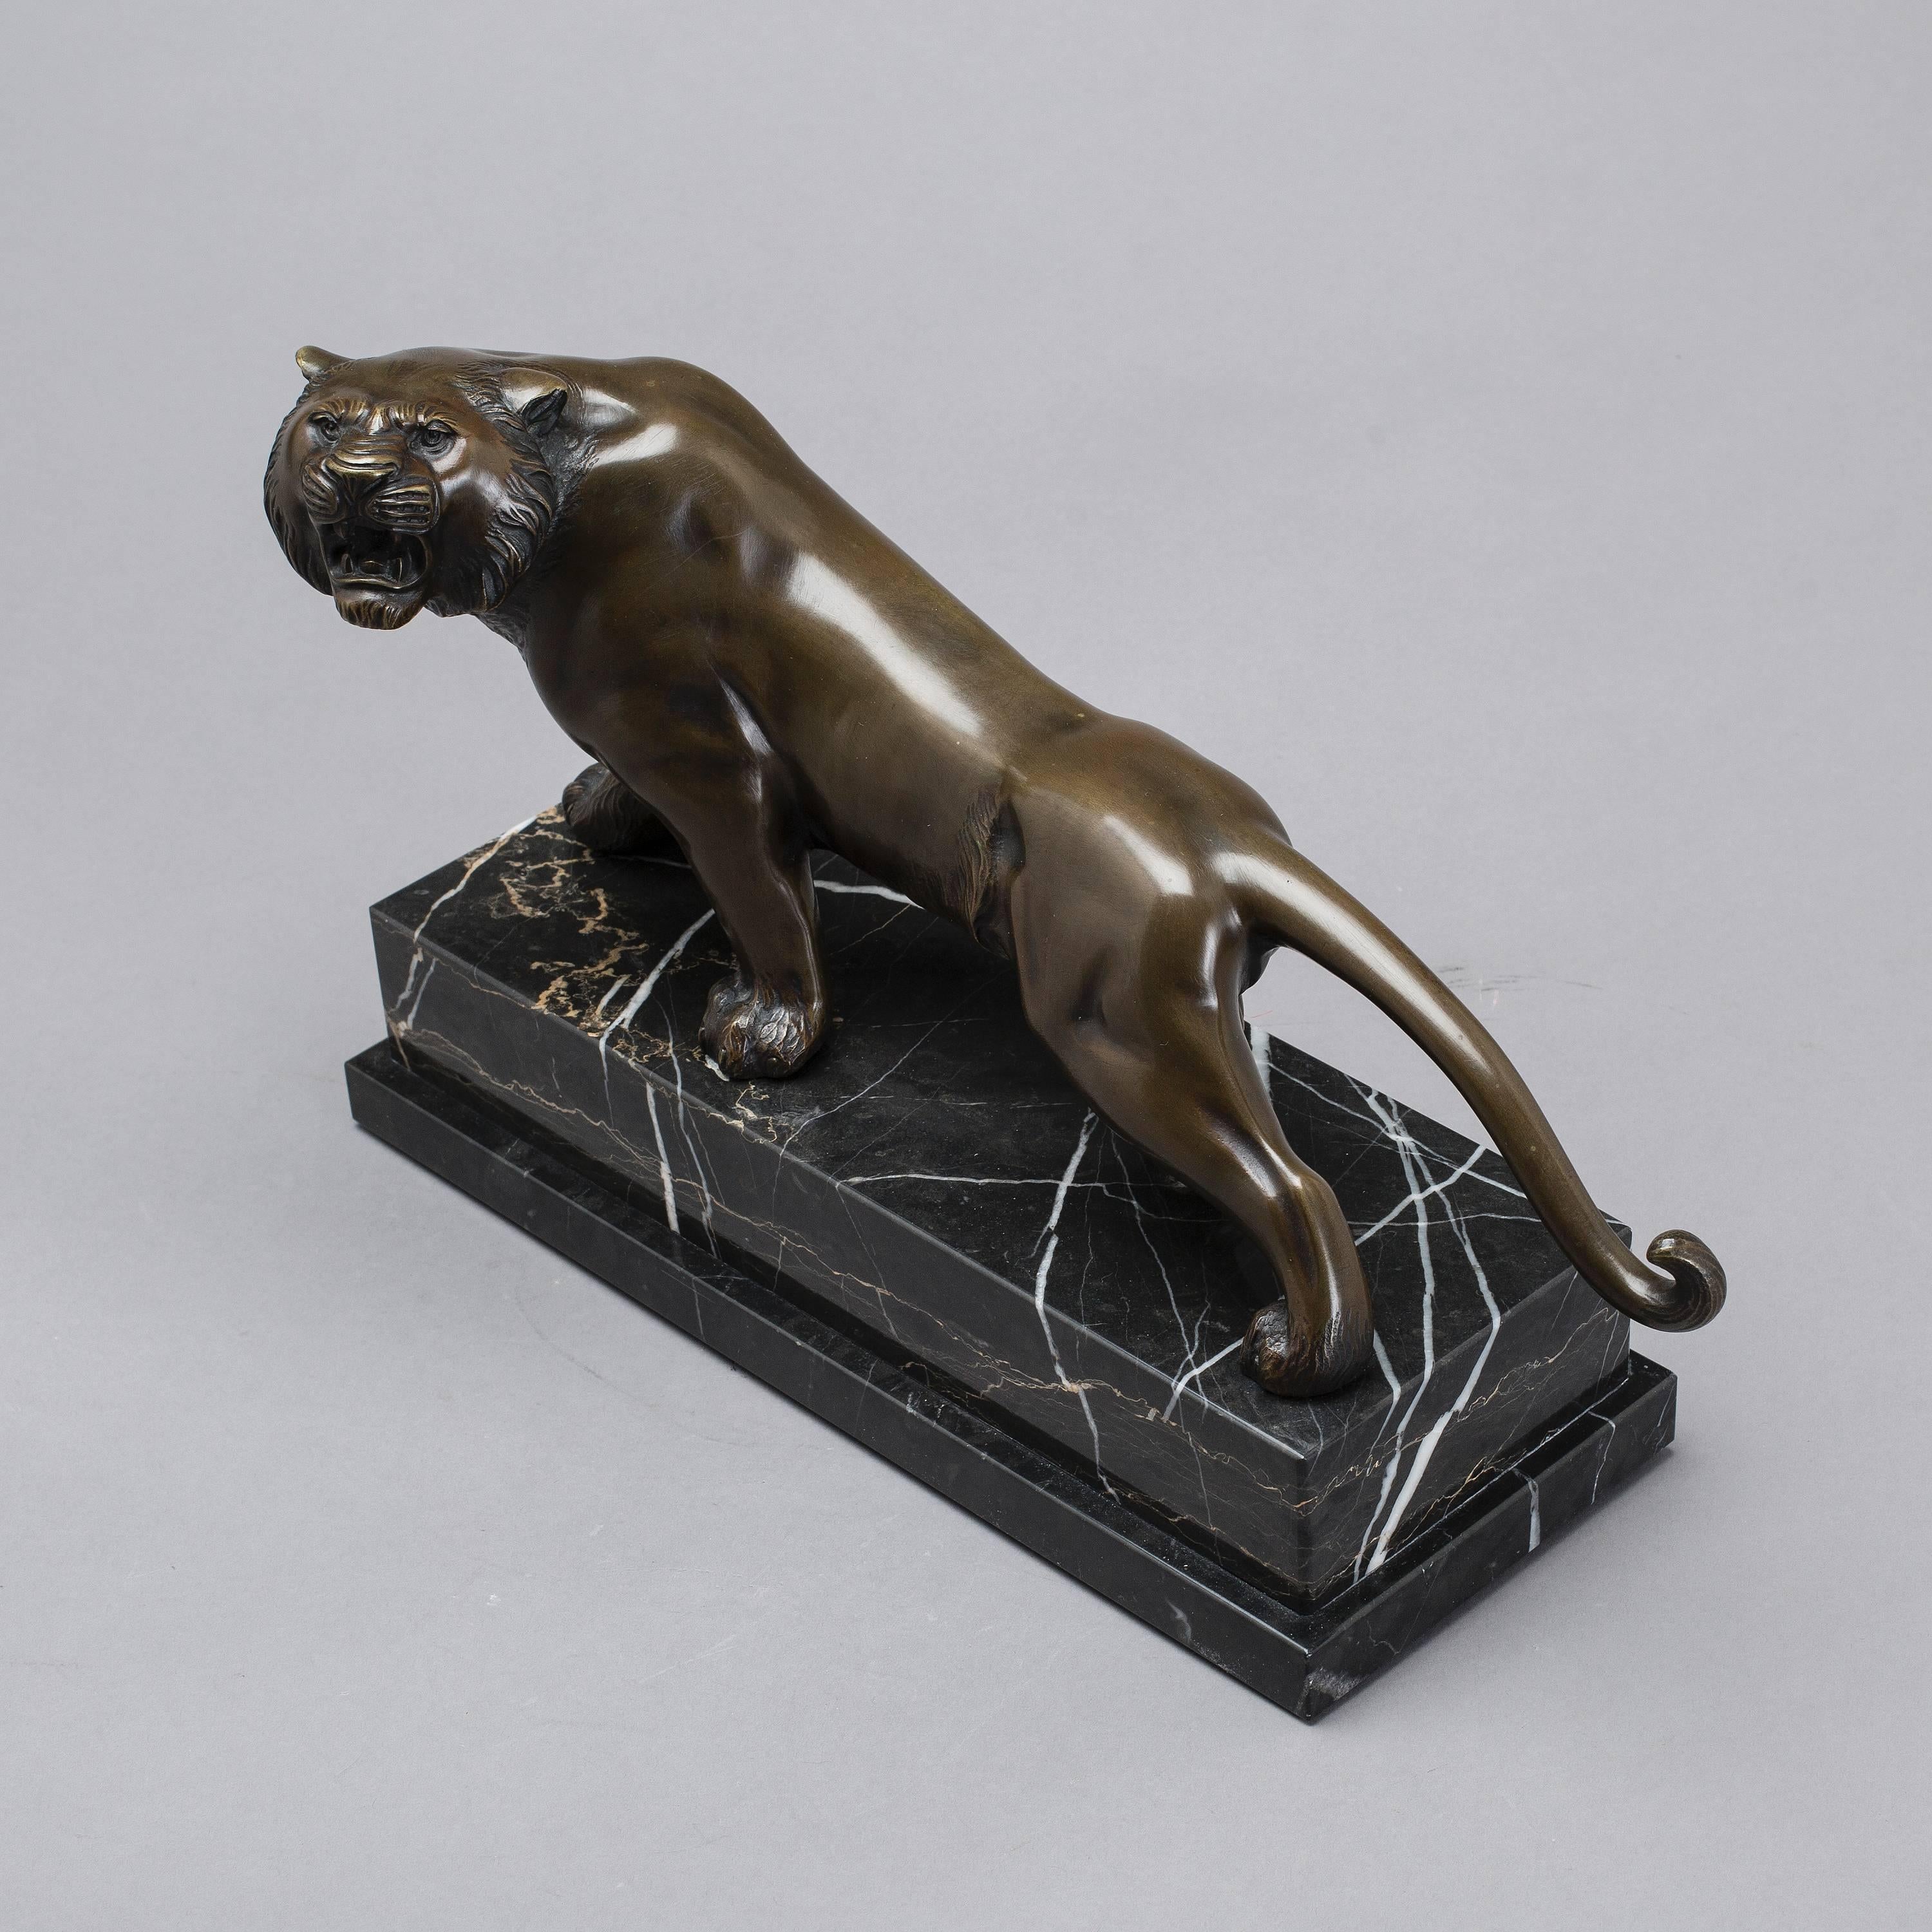 Heavy sculpture in the form of tiger, bronze plinth of stone, length about 39 cm. (15.35"). Good original condition.